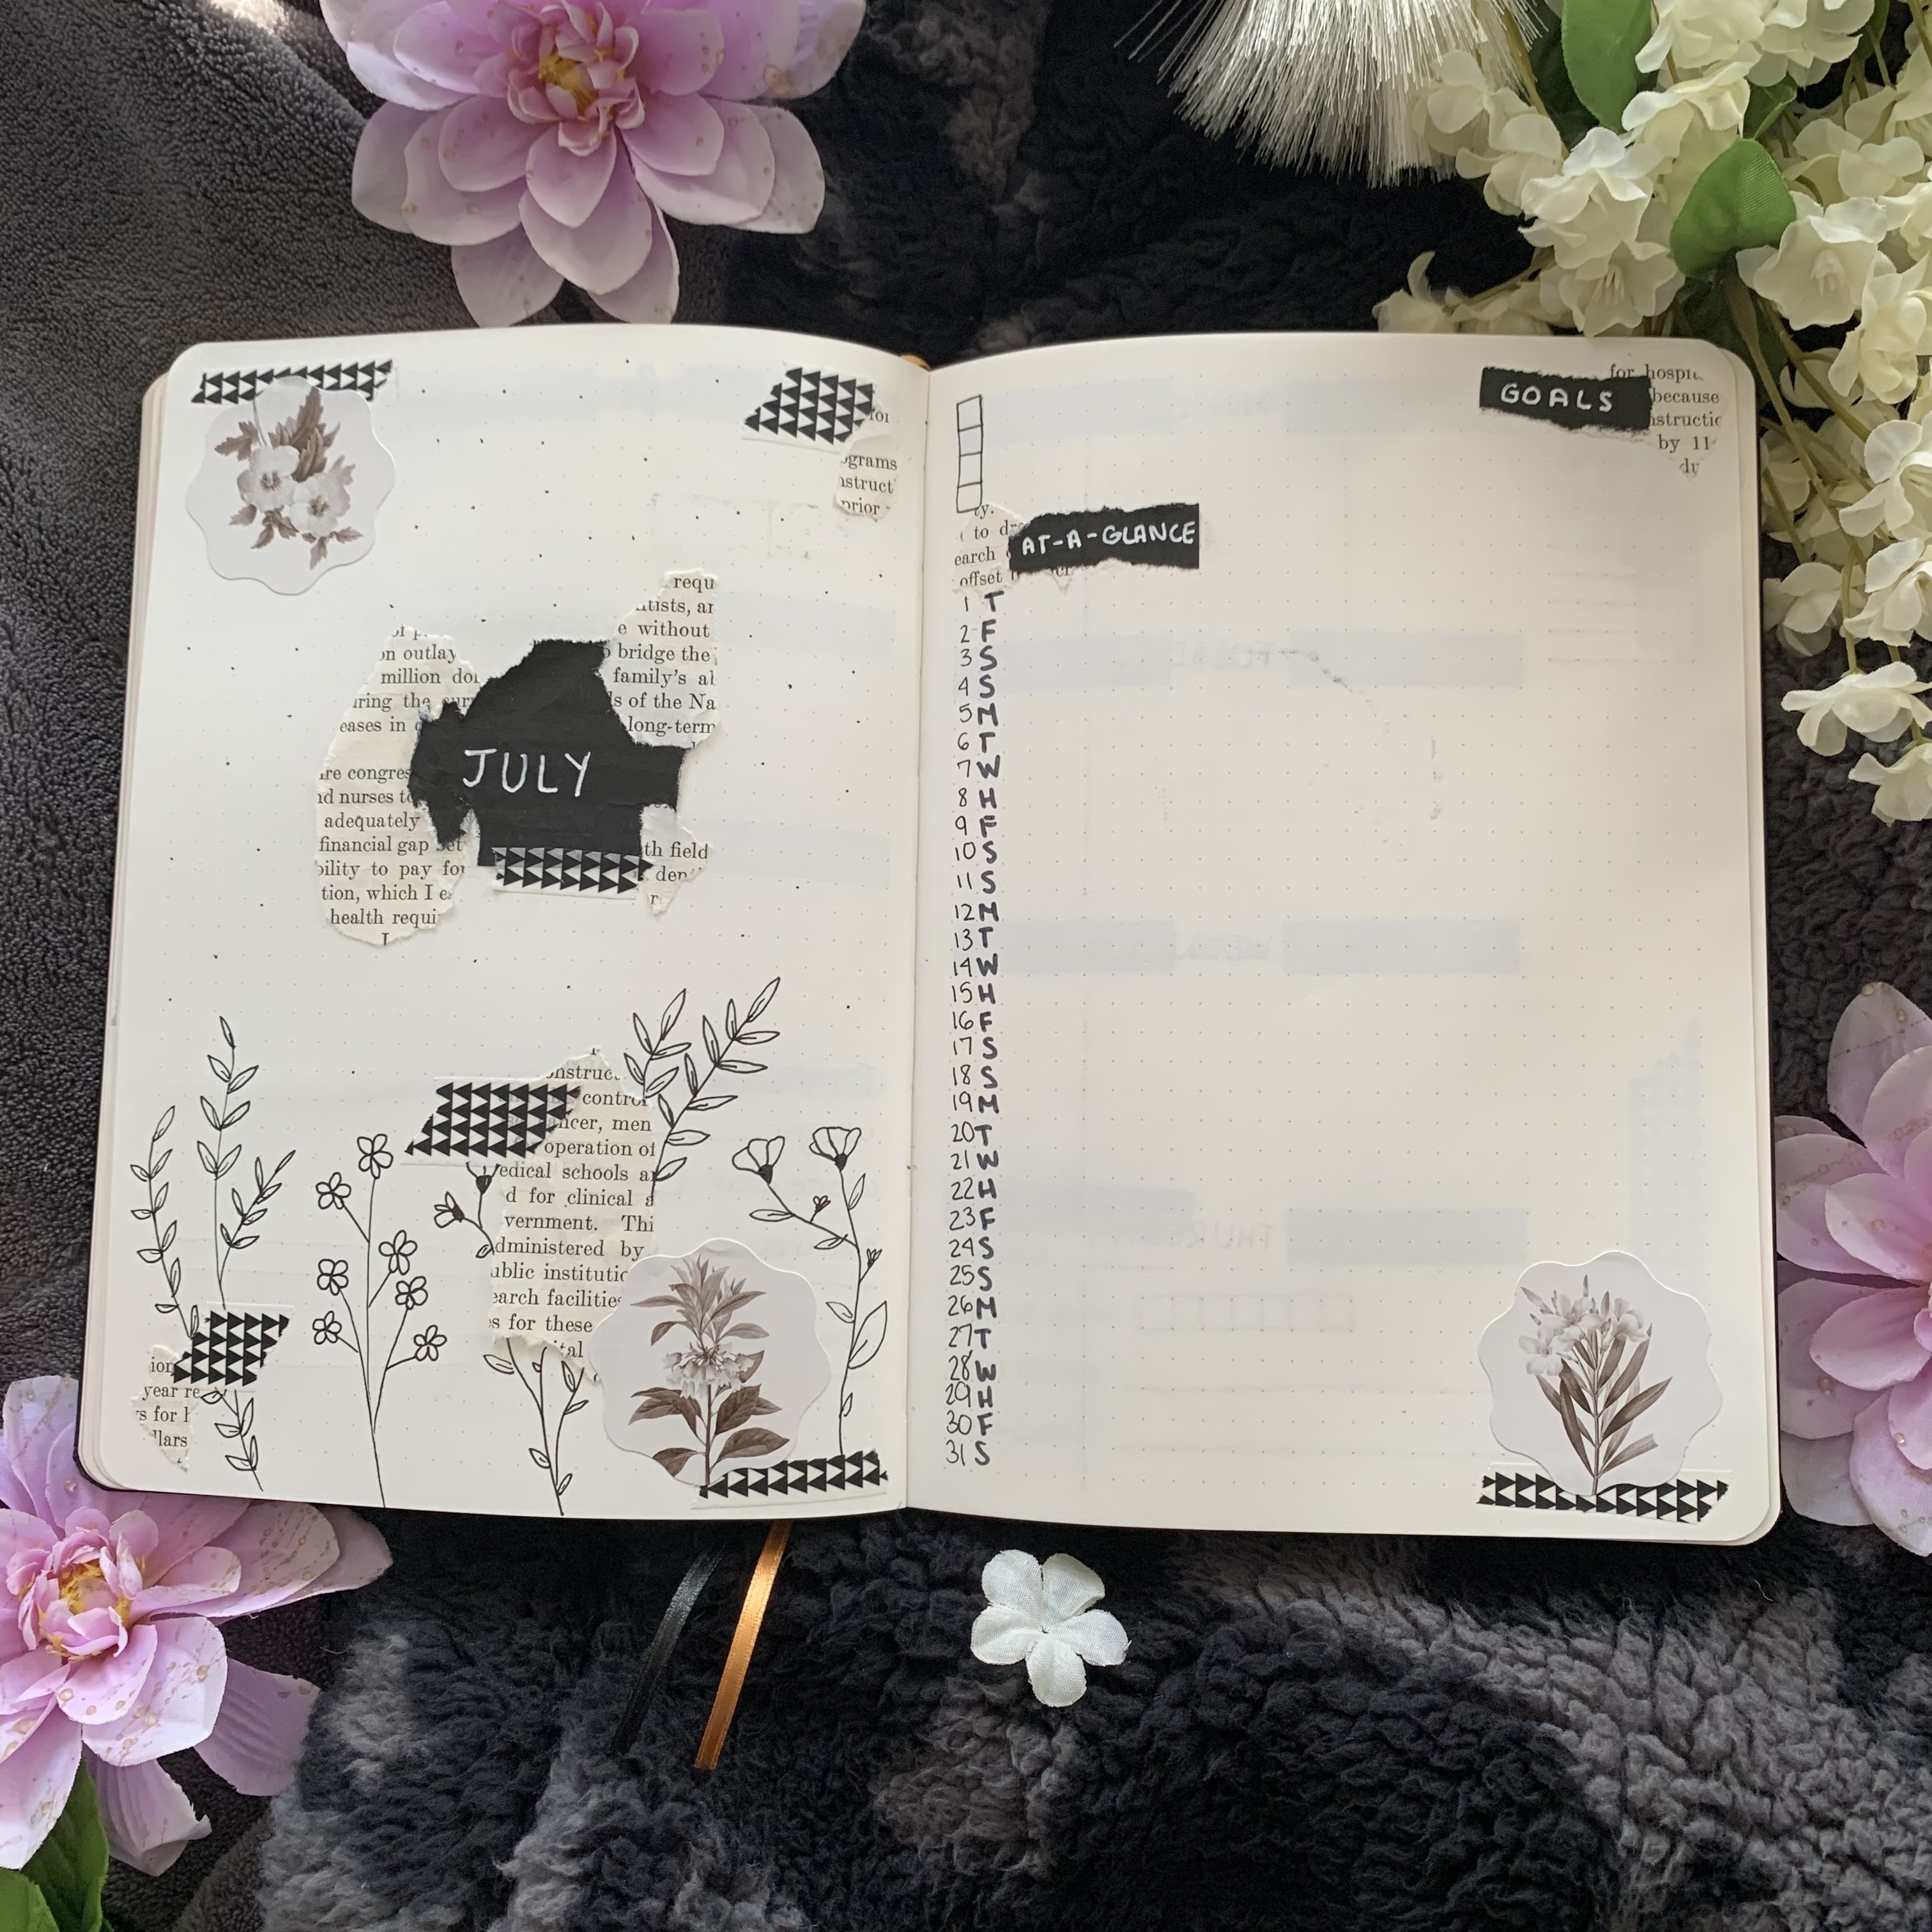 July 2021 Bullet Journal Spread - Title Page, Goals, and At-A-Glance